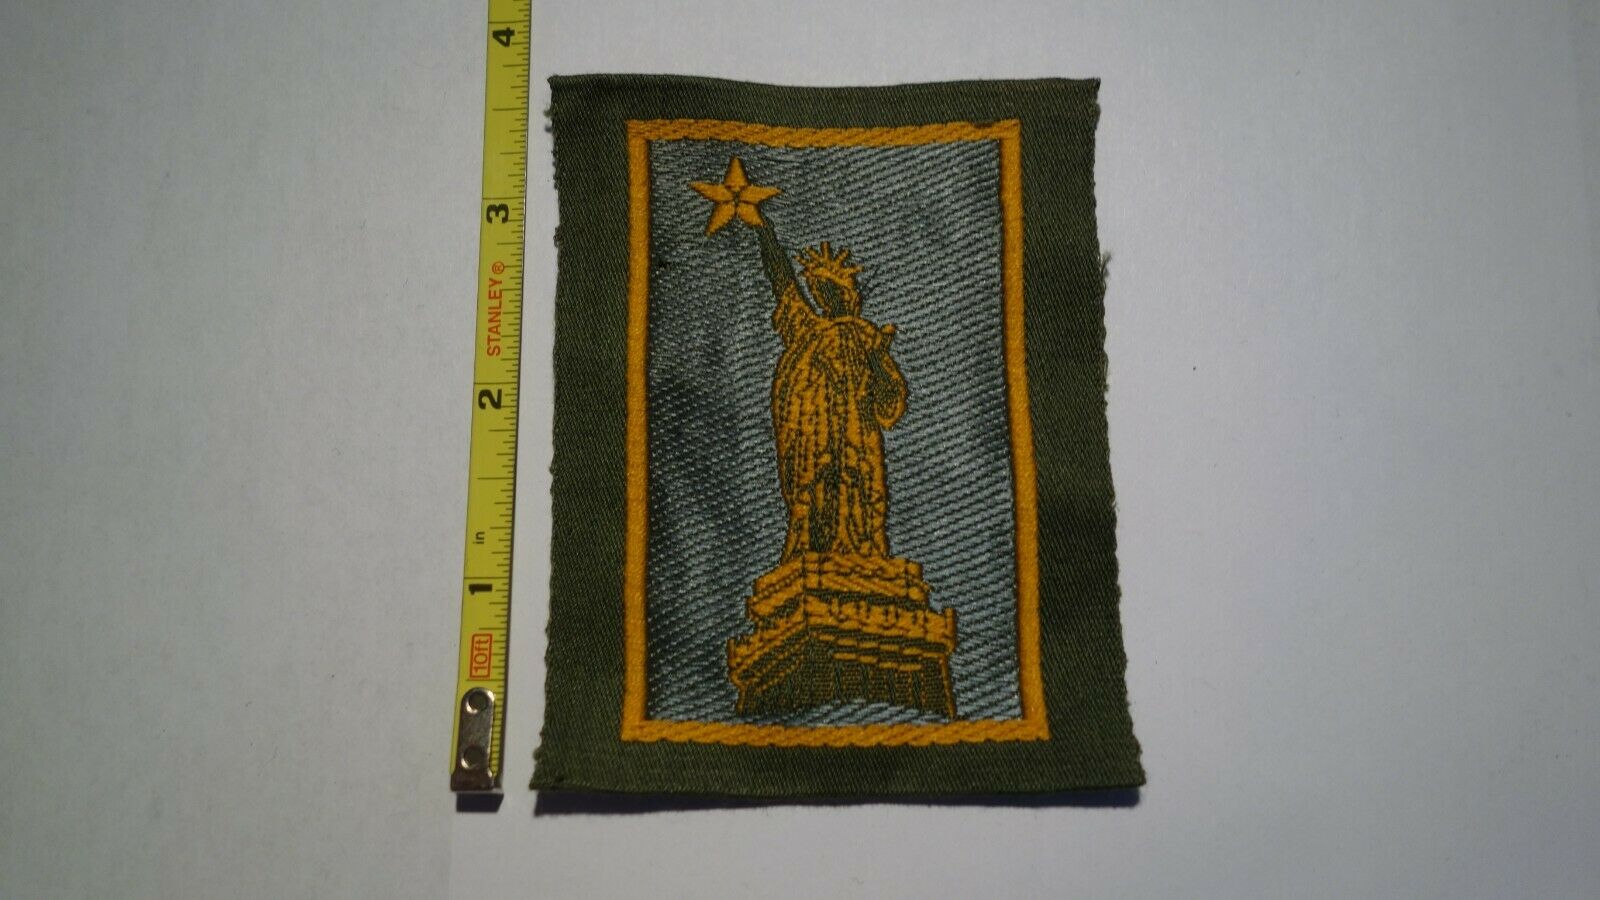 Extremely Rare Wwi 77th Statue Of Liberty Liberty Loan Style Patch. Rare!!!